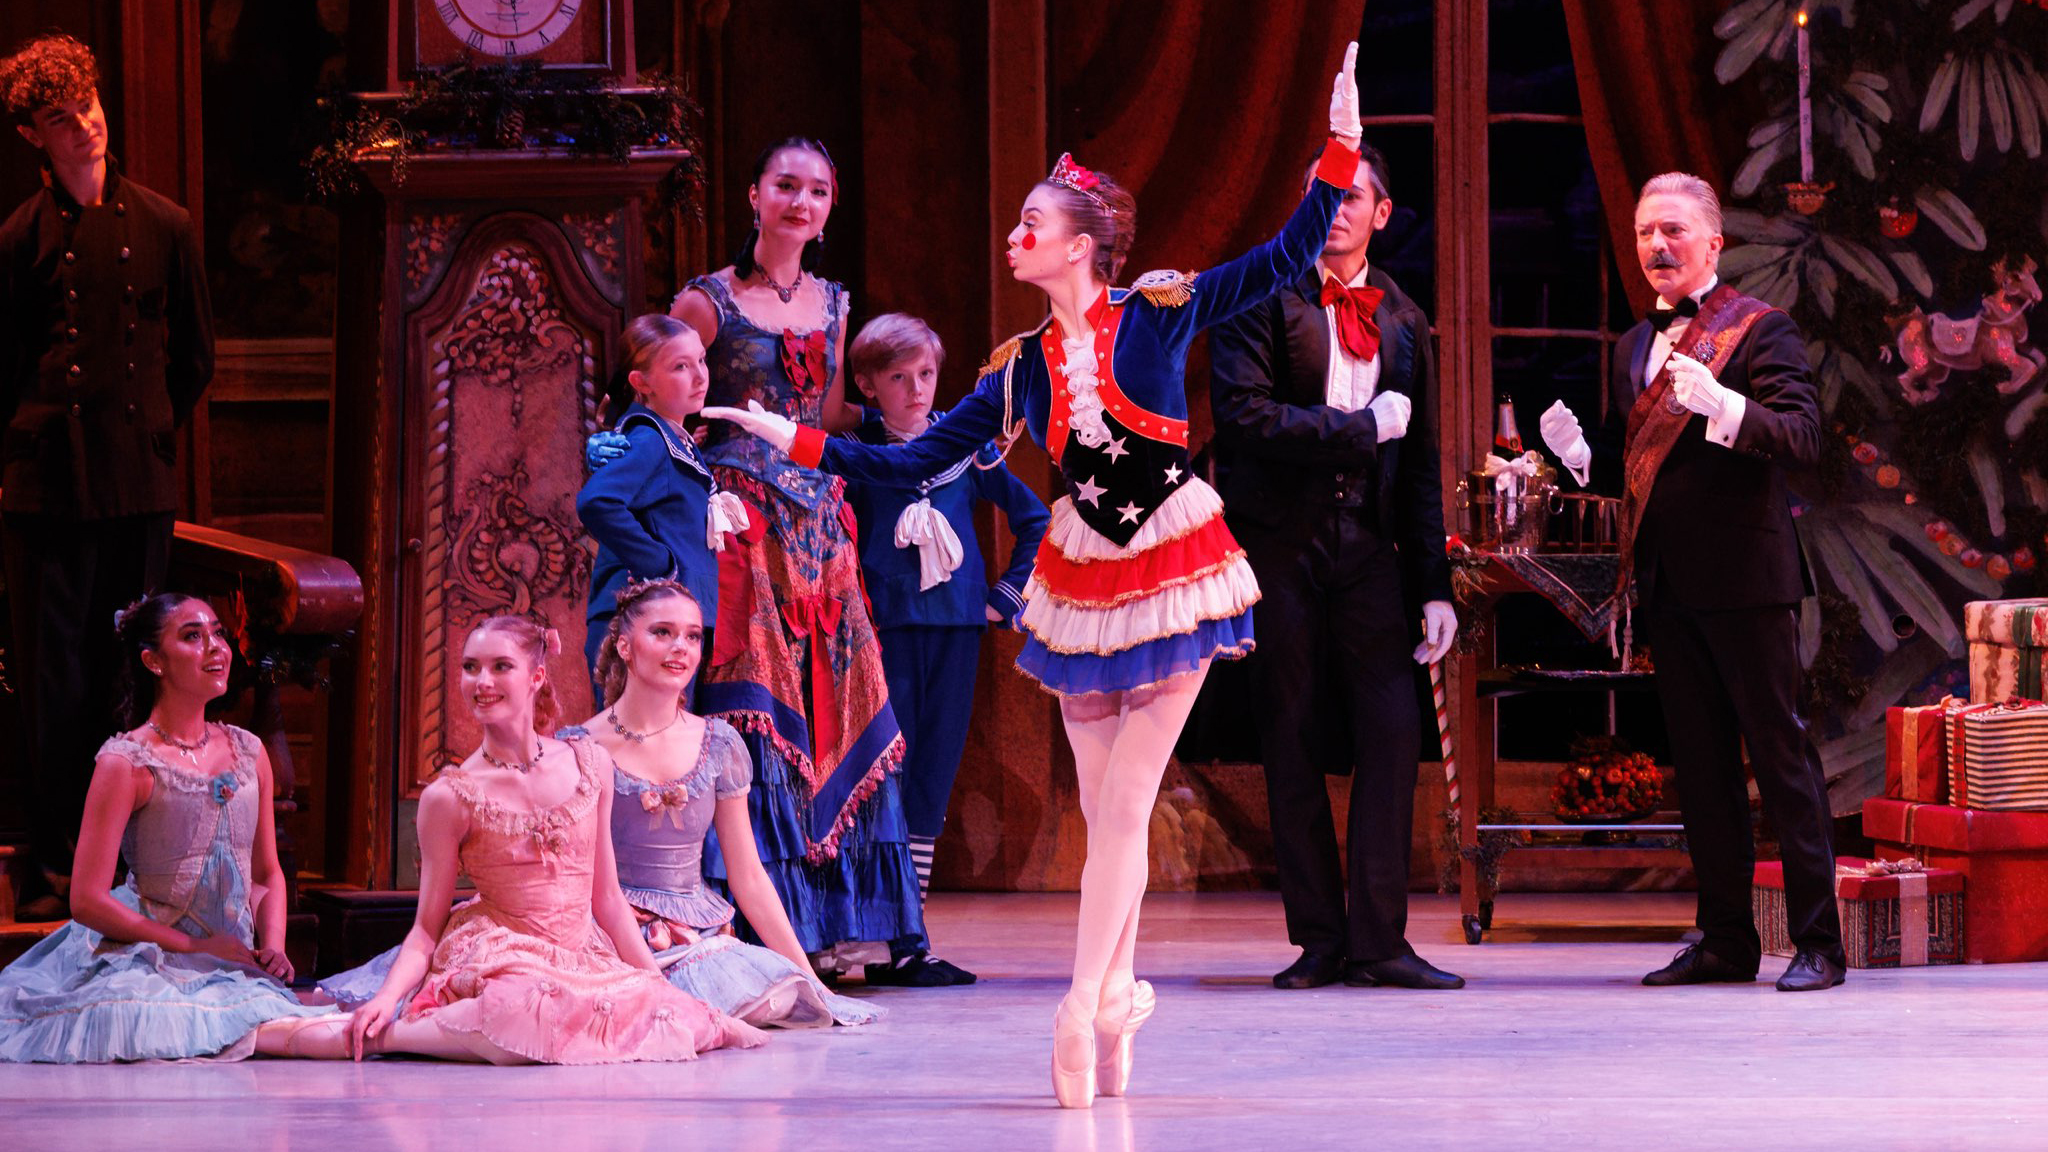 Abigail Brent stands onstage in sus-sous onstage. She holds her arms out to the side, bent at the elbows like a mechanical doll and kisses the air. She wears a red white and blue velvet jacket and short skirt, with a star-spangled cumberband, pink tights, pointe shoes and red crown. She also has red felt circles glued onto her cheeks. Young dancers sit on the floor and watch her dance.